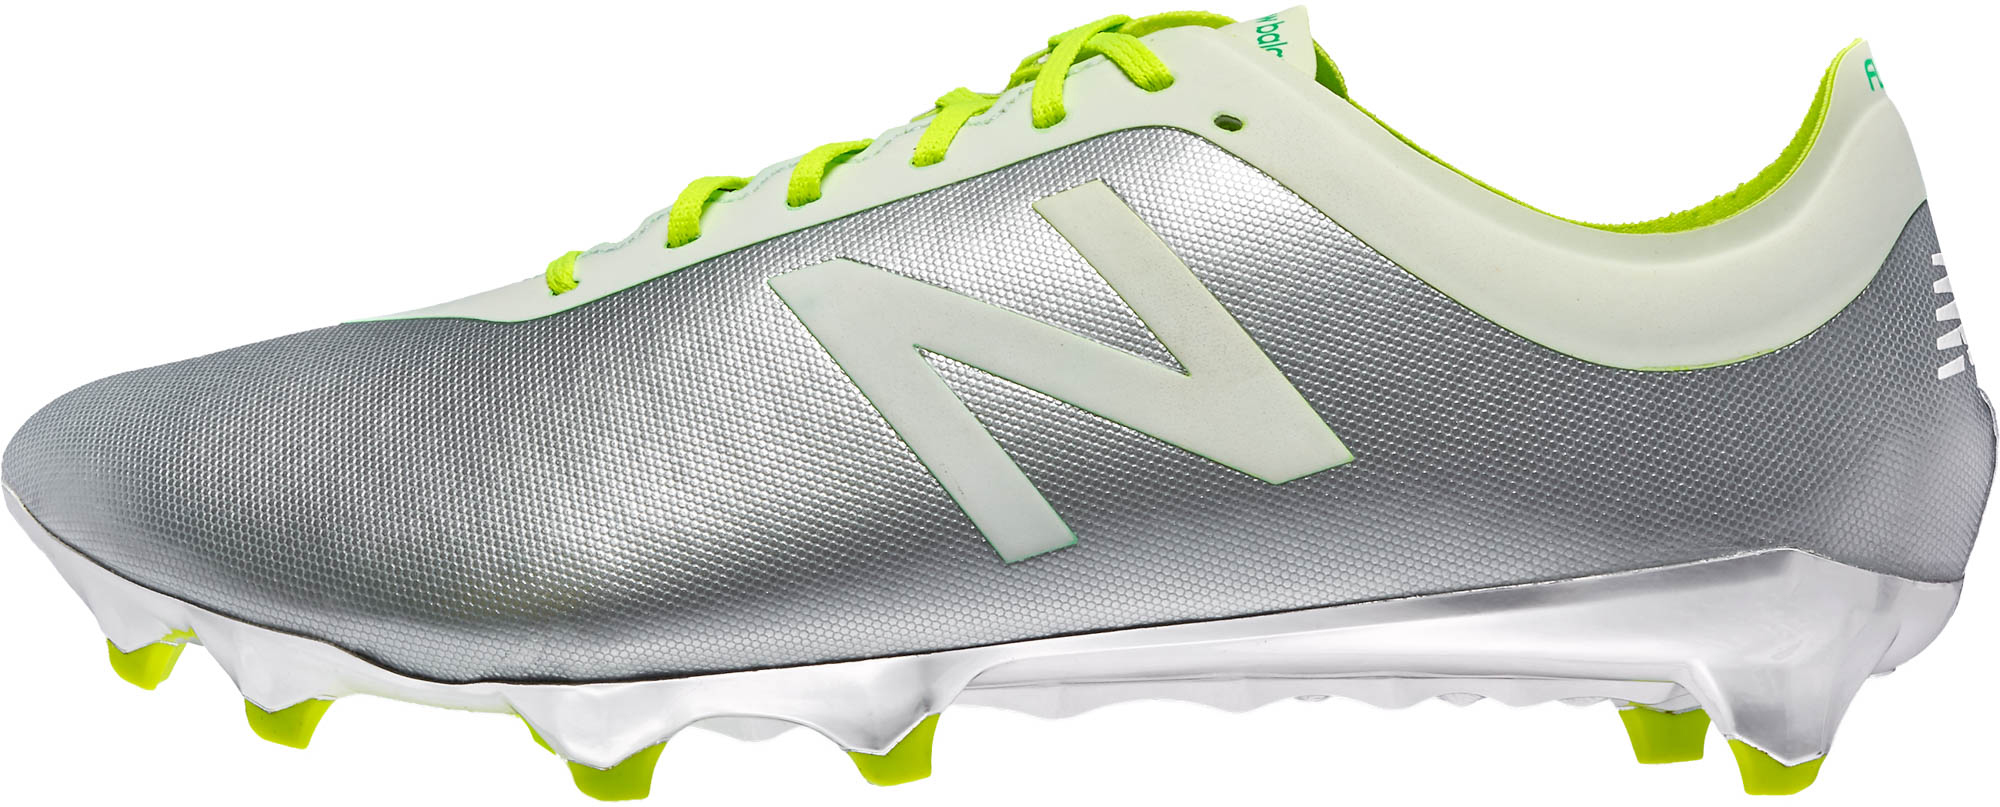 new balance soccer cleats Silver